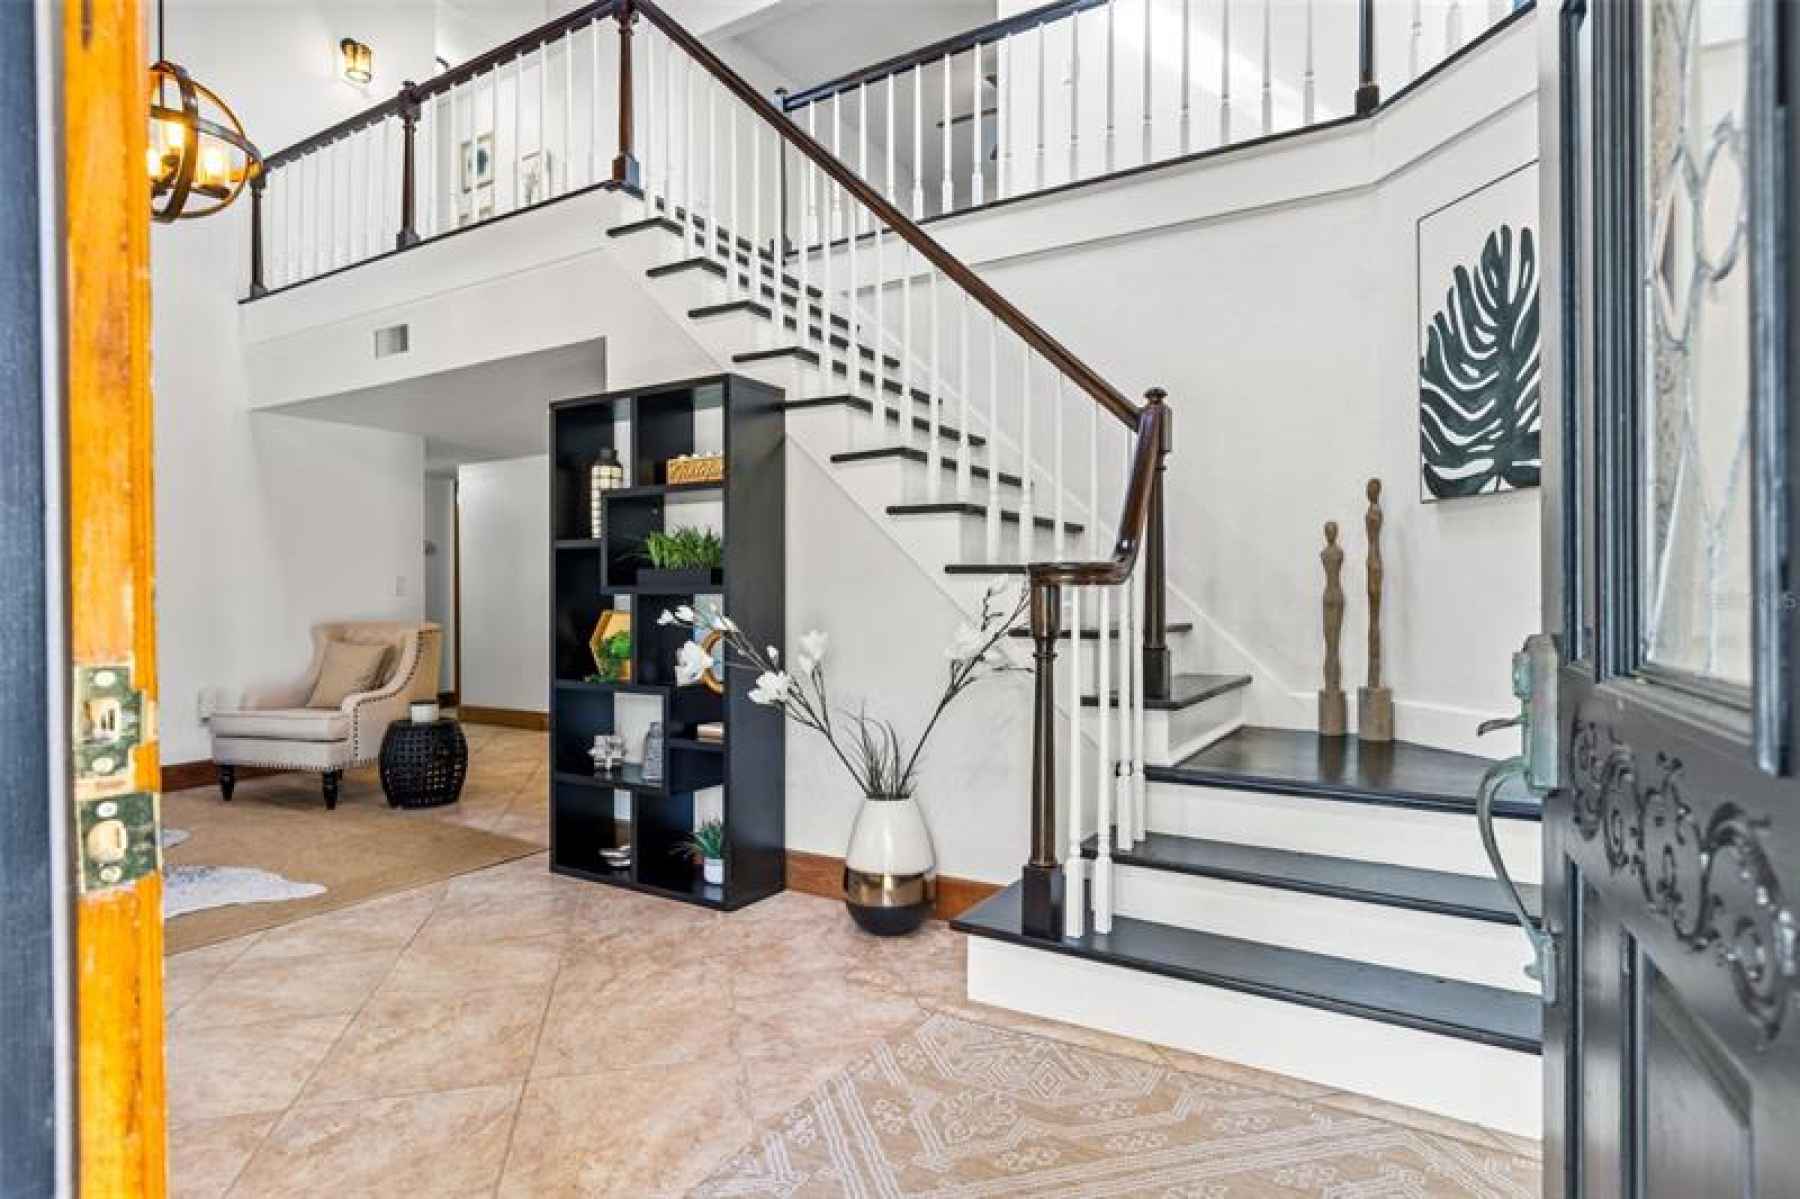 Foyer with view of stairs